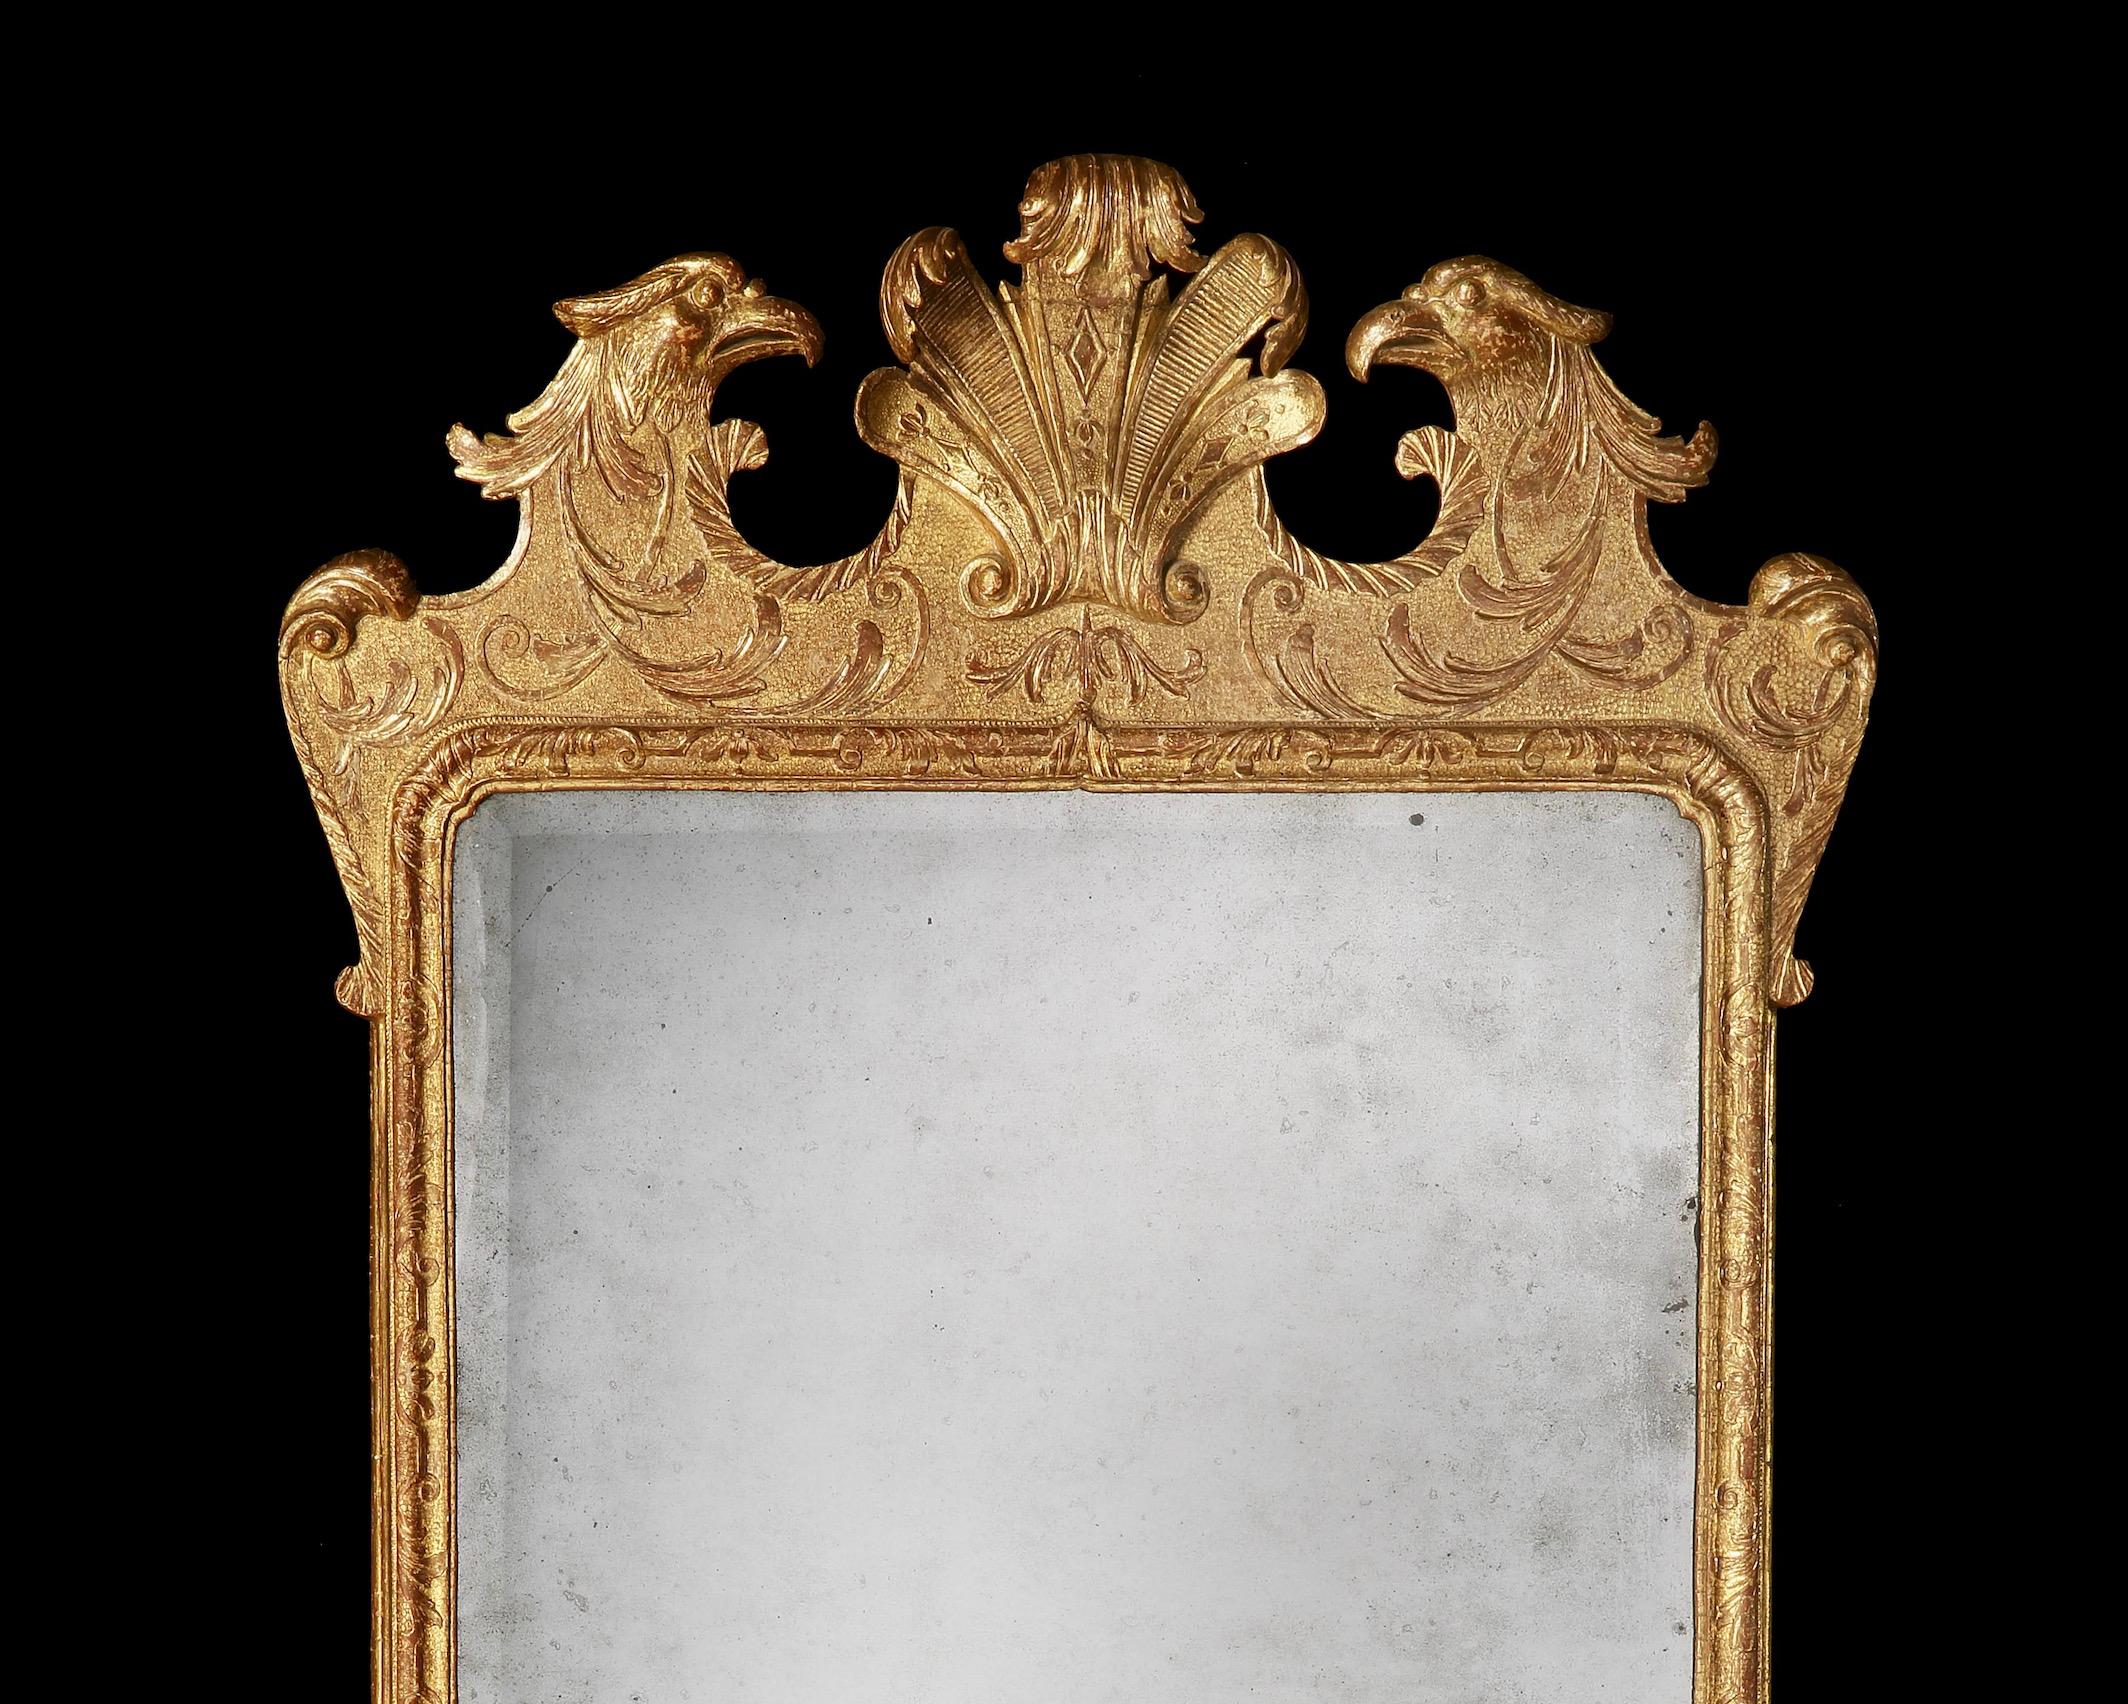 18th Century George II Giltwood Mirror with Eagles Attributed to John Belchier 1